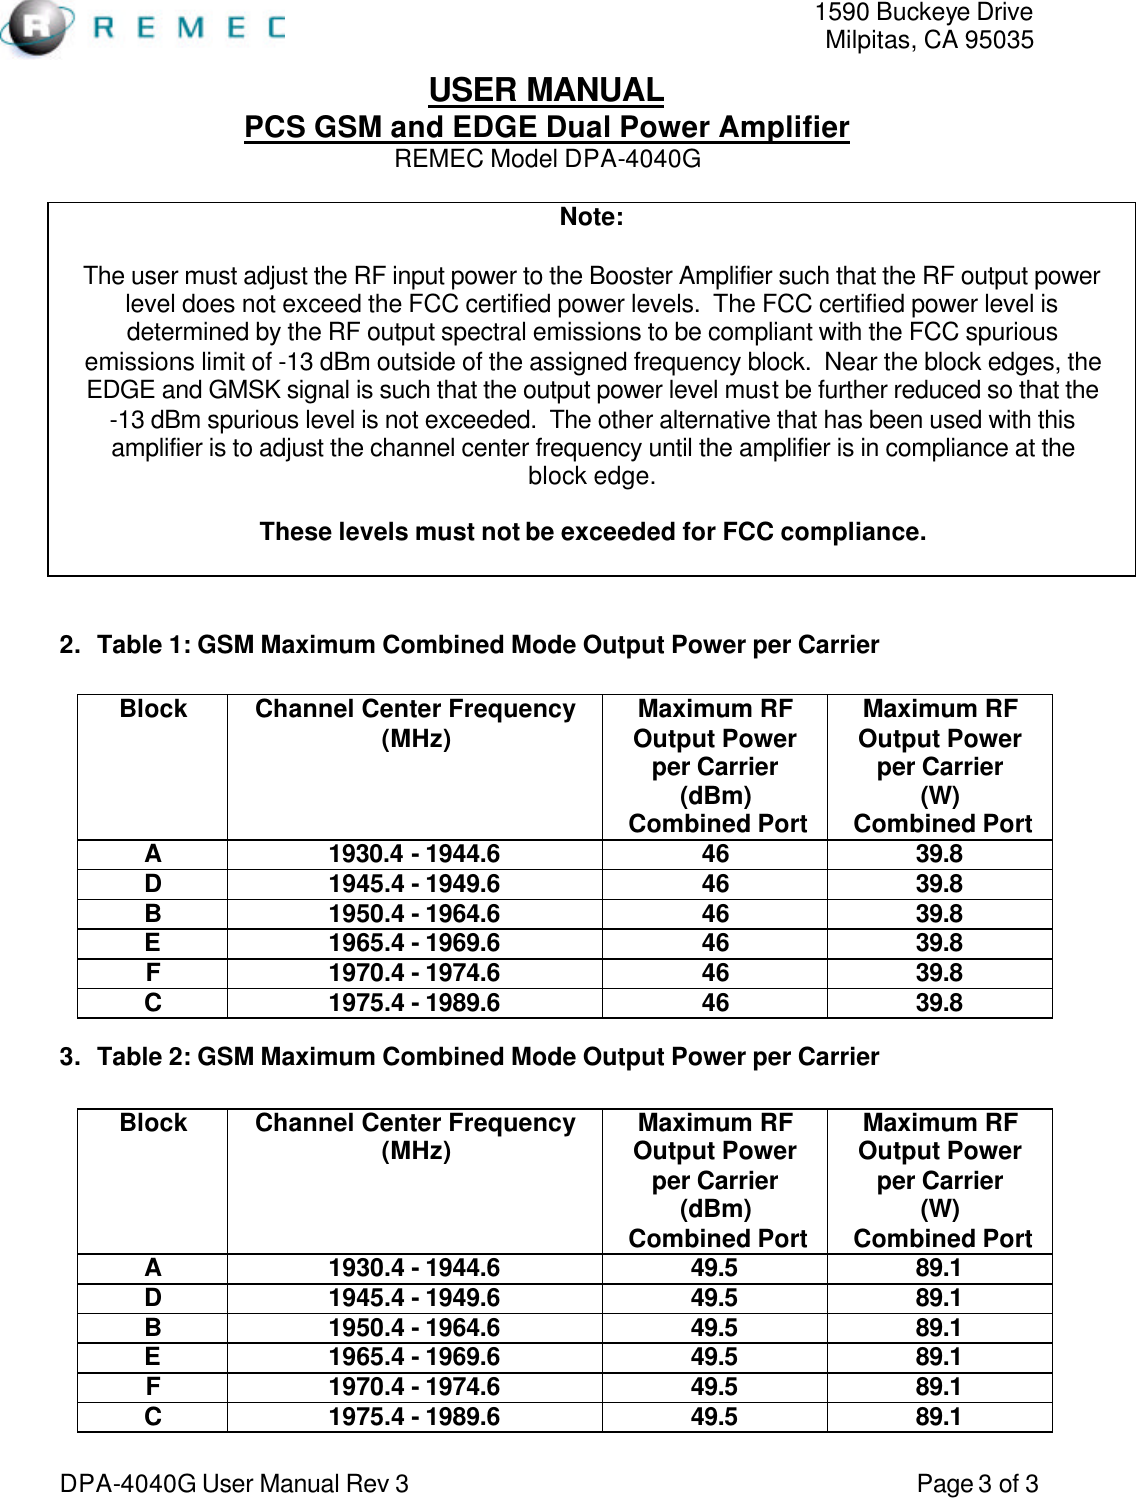   1590 Buckeye Drive Milpitas, CA 95035 USER MANUAL PCS GSM and EDGE Dual Power Amplifier REMEC Model DPA-4040G  DPA-4040G User Manual Rev 3                                                                                 Page 3 of 3 Note:  The user must adjust the RF input power to the Booster Amplifier such that the RF output power level does not exceed the FCC certified power levels.  The FCC certified power level is determined by the RF output spectral emissions to be compliant with the FCC spurious emissions limit of -13 dBm outside of the assigned frequency block.  Near the block edges, the EDGE and GMSK signal is such that the output power level must be further reduced so that the  -13 dBm spurious level is not exceeded.  The other alternative that has been used with this amplifier is to adjust the channel center frequency until the amplifier is in compliance at the block edge.  These levels must not be exceeded for FCC compliance.   2. Table 1: GSM Maximum Combined Mode Output Power per Carrier  Block Channel Center Frequency (MHz)  Maximum RF Output Power per Carrier (dBm)  Combined Port Maximum RF Output Power per Carrier (W)  Combined Port A 1930.4 - 1944.6 46 39.8 D 1945.4 - 1949.6 46 39.8 B 1950.4 - 1964.6 46 39.8 E 1965.4 - 1969.6 46 39.8 F 1970.4 - 1974.6 46 39.8 C 1975.4 - 1989.6 46 39.8 3. Table 2: GSM Maximum Combined Mode Output Power per Carrier  Block Channel Center Frequency (MHz)  Maximum RF Output Power per Carrier (dBm)  Combined Port Maximum RF Output Power per Carrier (W)  Combined Port A 1930.4 - 1944.6 49.5 89.1 D 1945.4 - 1949.6 49.5 89.1 B 1950.4 - 1964.6 49.5 89.1 E 1965.4 - 1969.6 49.5 89.1 F 1970.4 - 1974.6 49.5 89.1 C 1975.4 - 1989.6 49.5 89.1 